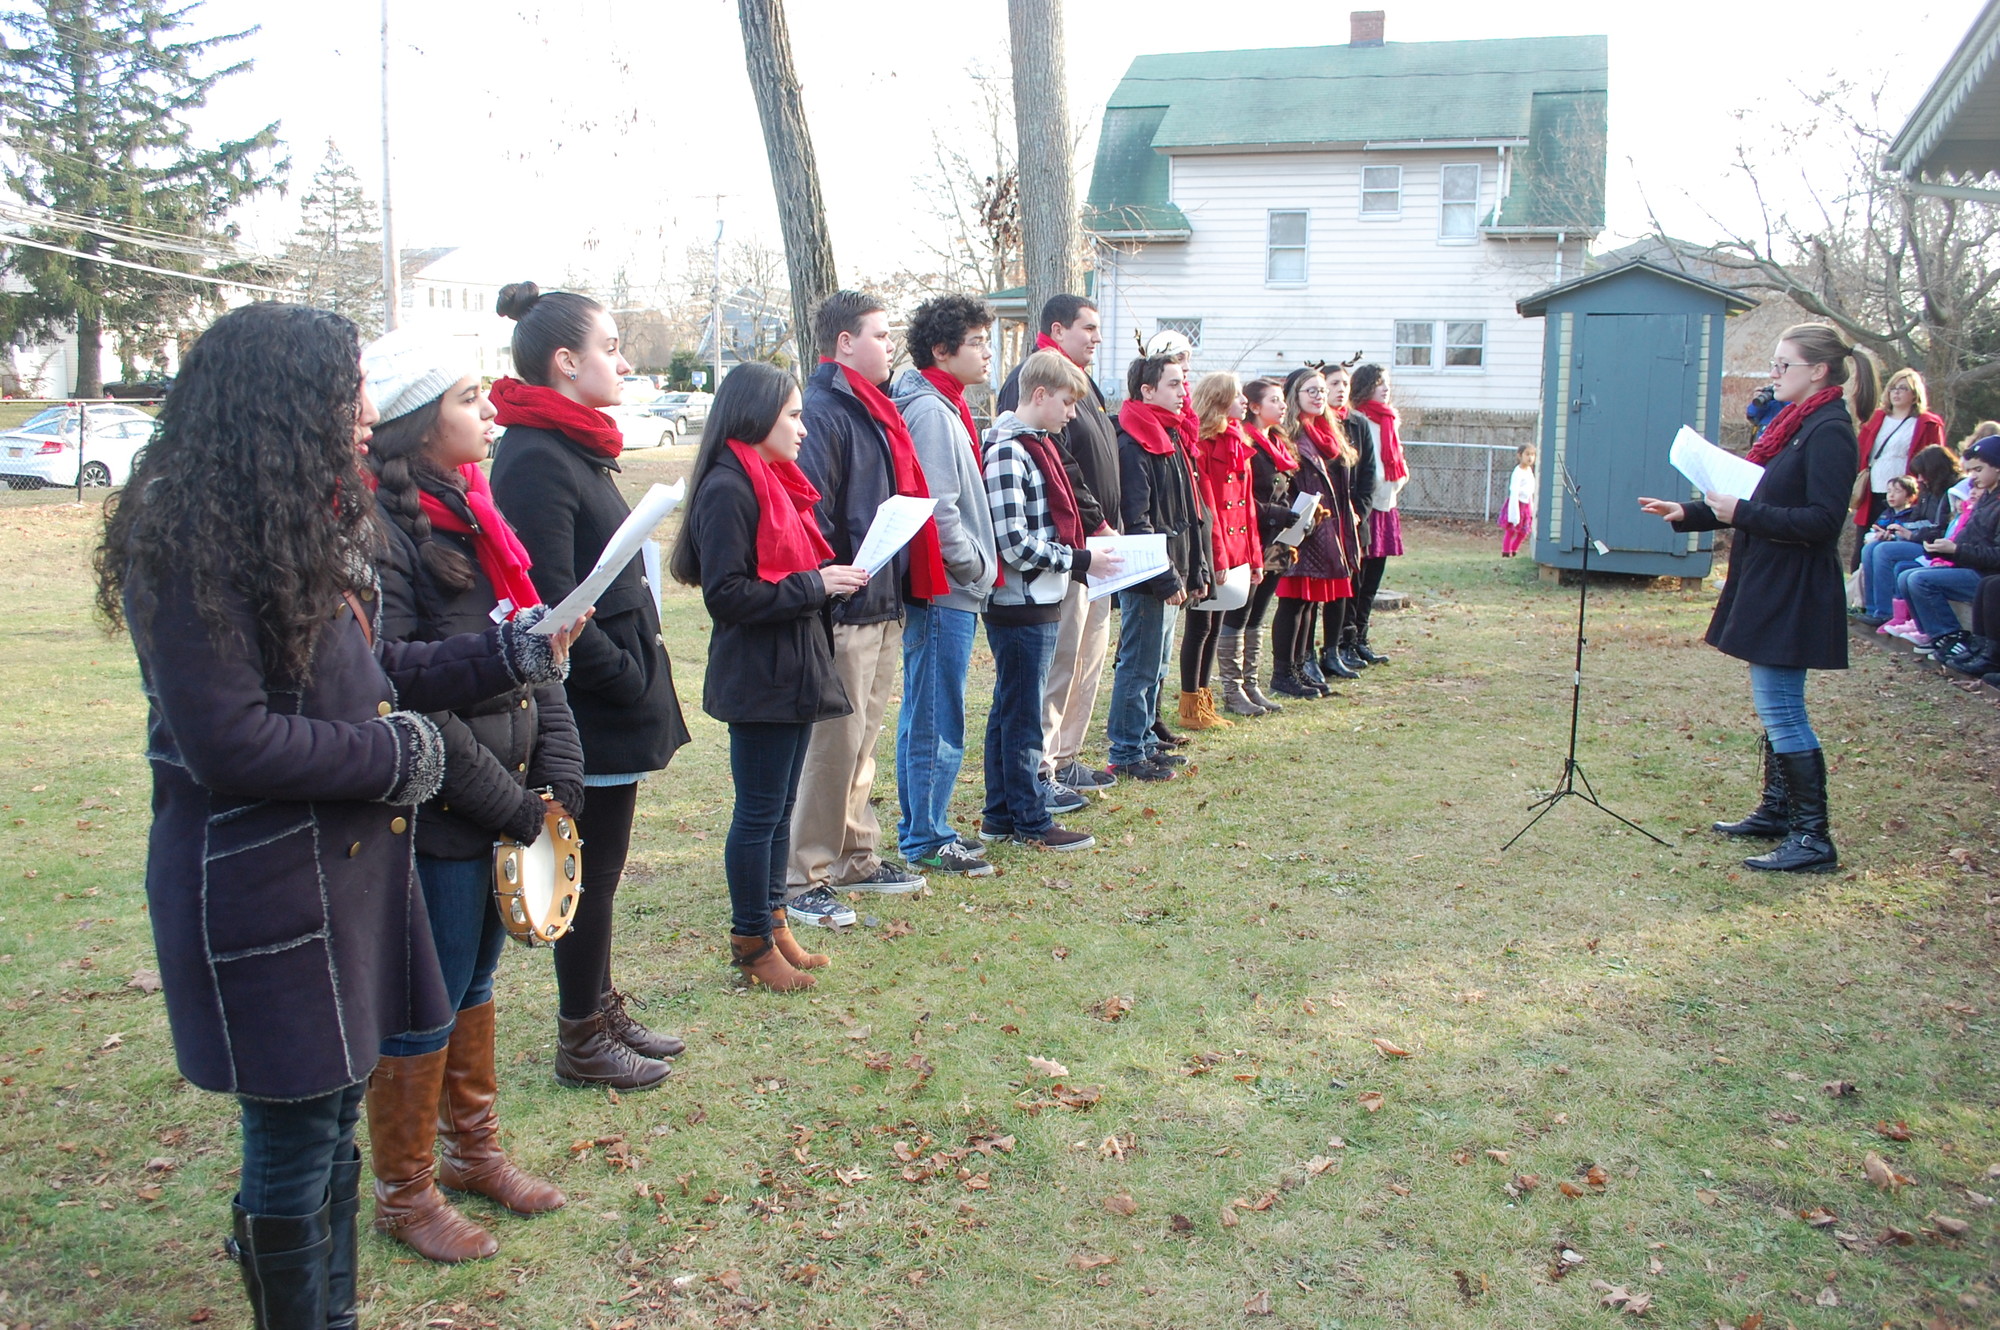 The Wantagh High School Vocal Jazz group performed a medley of holiday songs at the Wantagh Preservation Society’s open house on Dec. 14 at its museum on Wantagh Ave.